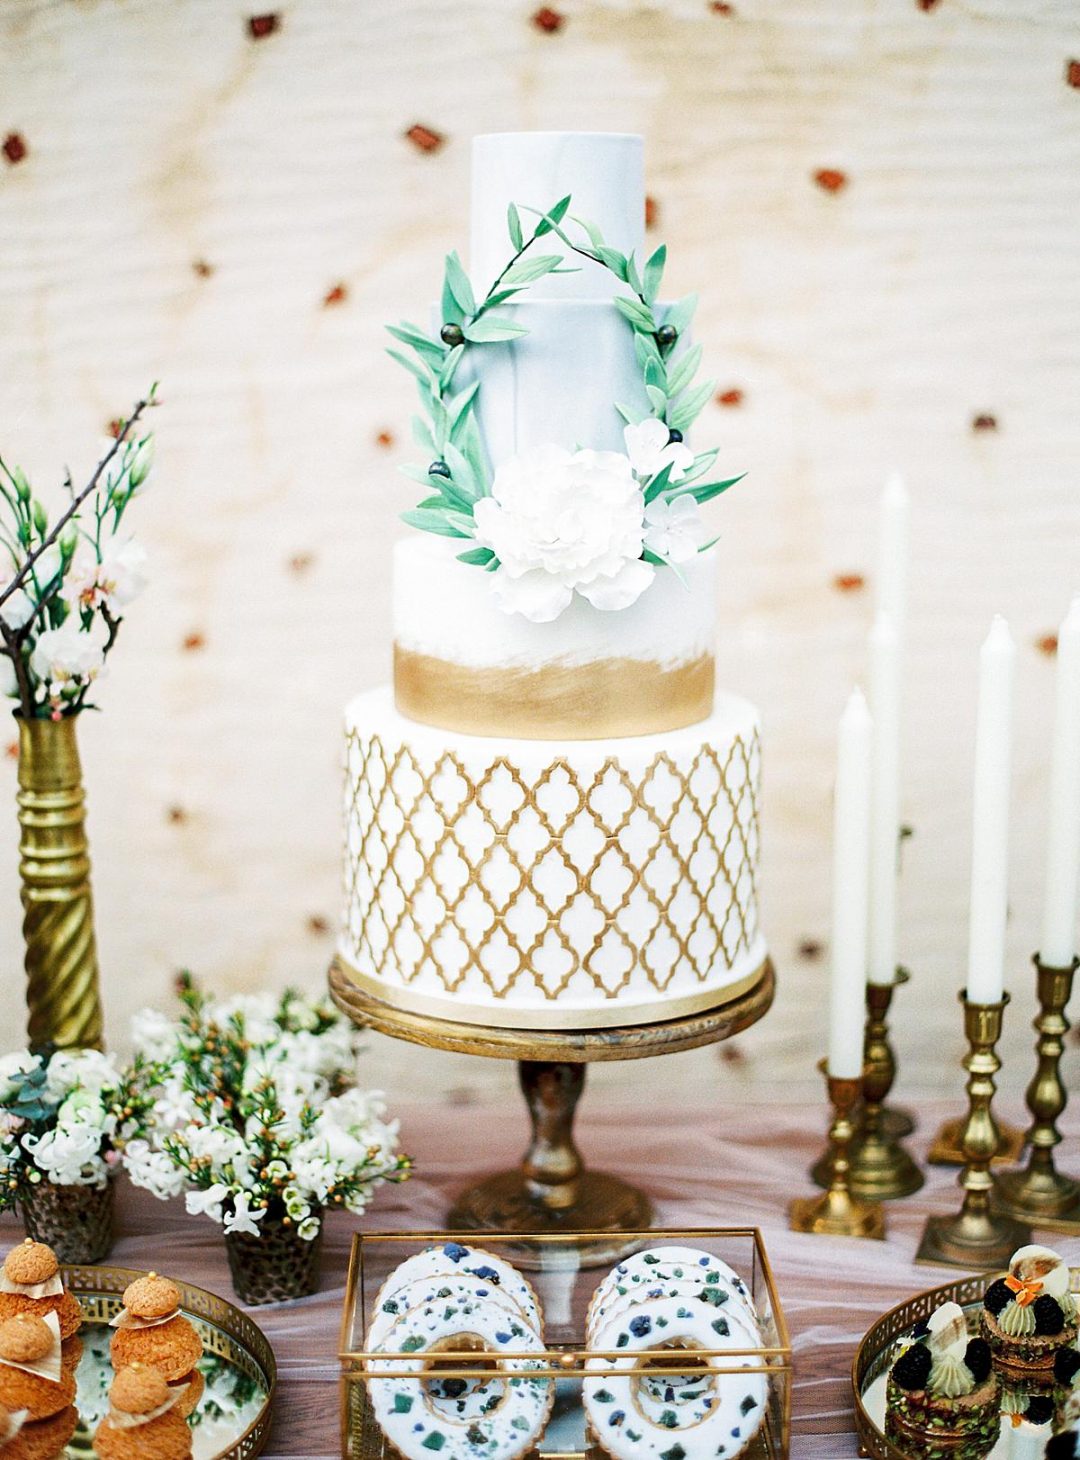 6 tips on how to choose your destination wedding cake | Les Anagnou ...